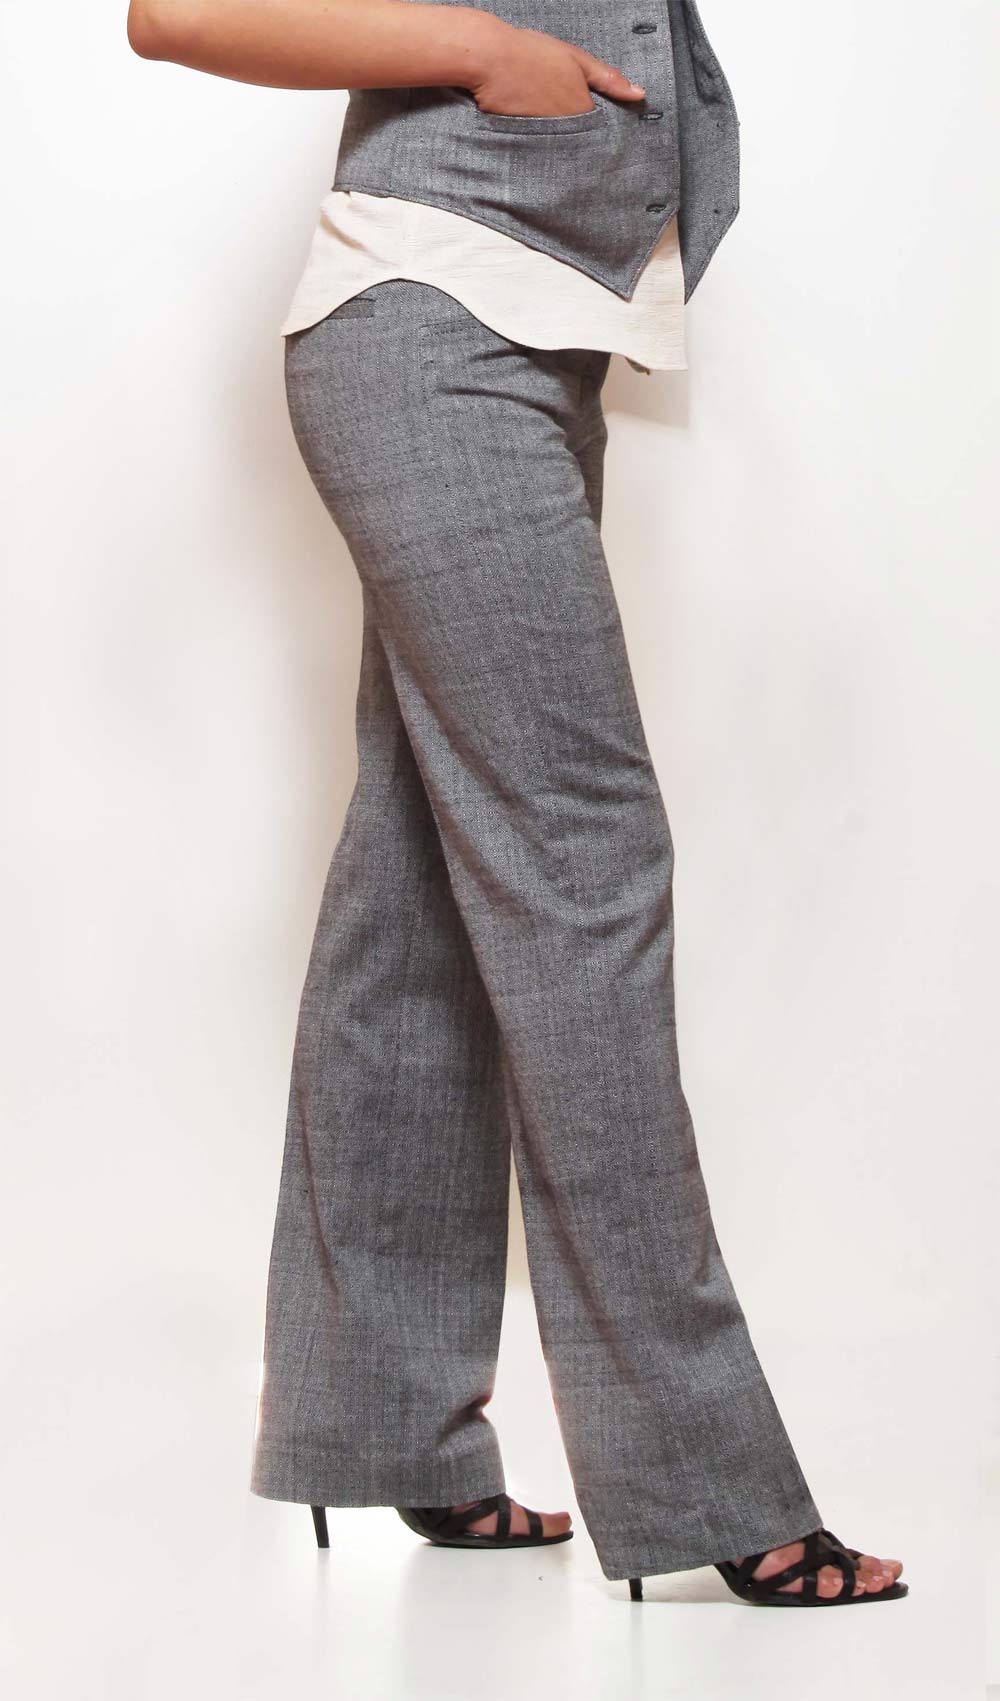 Relax Fit Handwoven Trouser made from 100% cotton designed by Khumanthem Atelier